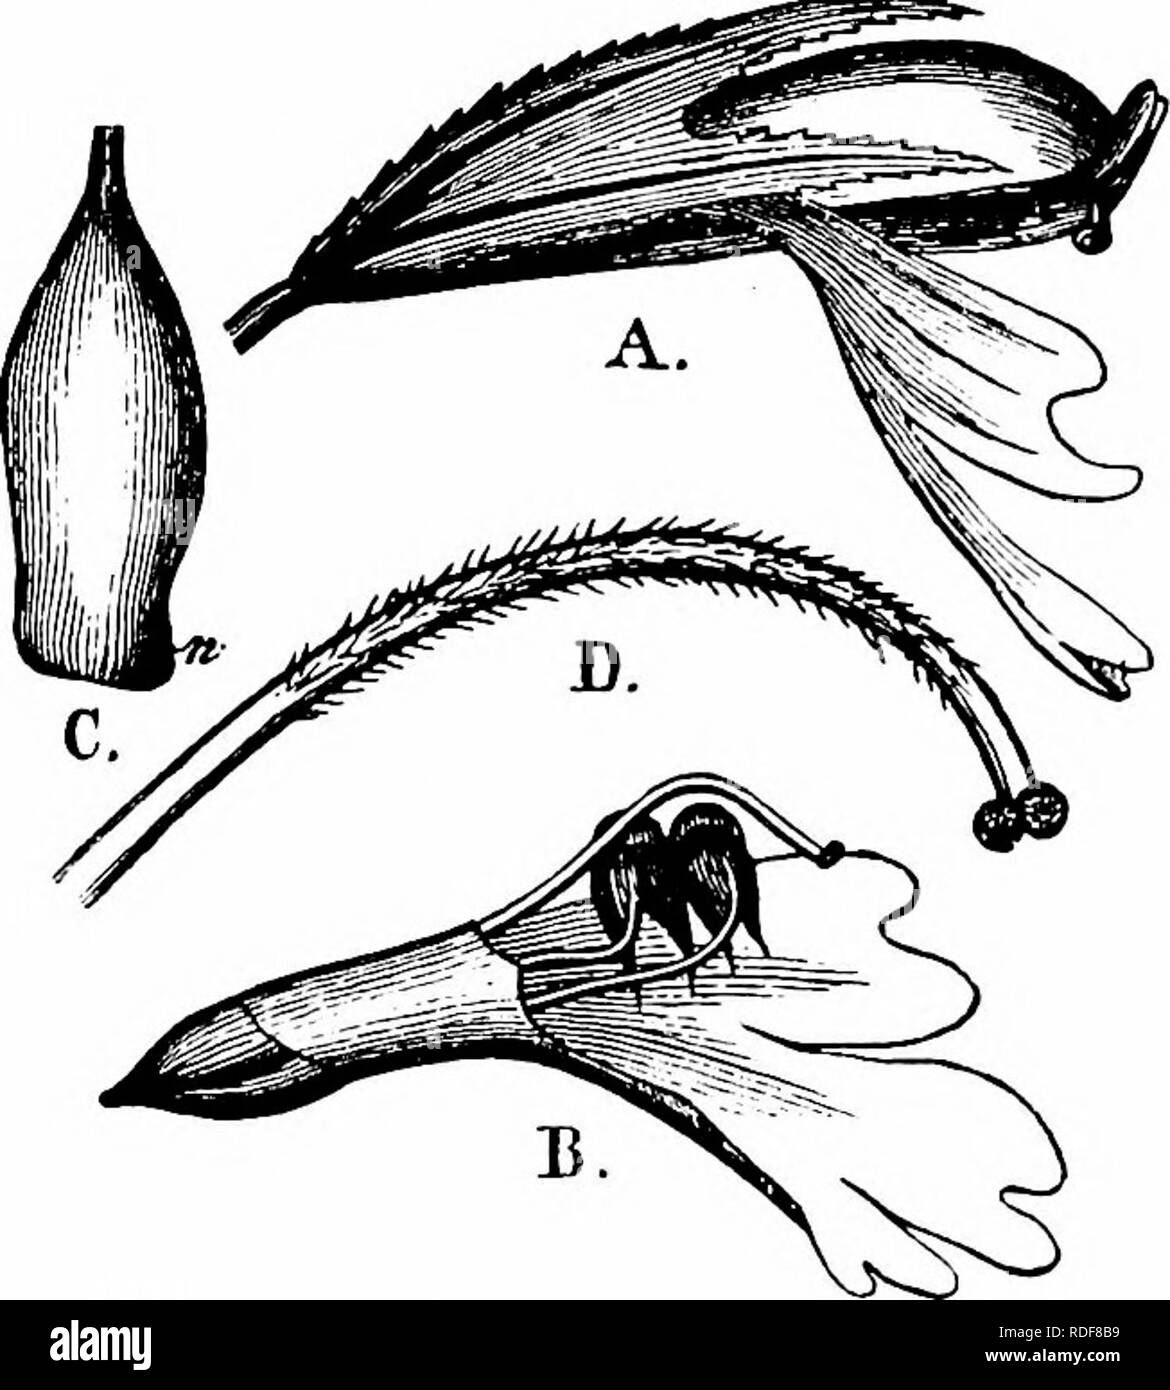 . Handbook of flower pollination : based upon Hermann Mu?ller's work 'The fertilisation of flowers by insects' . Fertilization of plants. SCROPHULARINEAE 227 large-flowered variety (= E. Rostkoviana Hayne) the same kind of automatic self- pollination occurs, by means of further growth of the corolla-tube, as he has described in the case of Rhinanthus hirsutus and R. angustifolius (cf. pp. 219, 220). This applies also to Euphrasia tricuspidata L. and E. versicolor A. Kern. Darwin (' Cross Fertilisation,' p. 368) found E. officinalis fertile by automatic self-pollination. Flower visitors natural Stock Photo